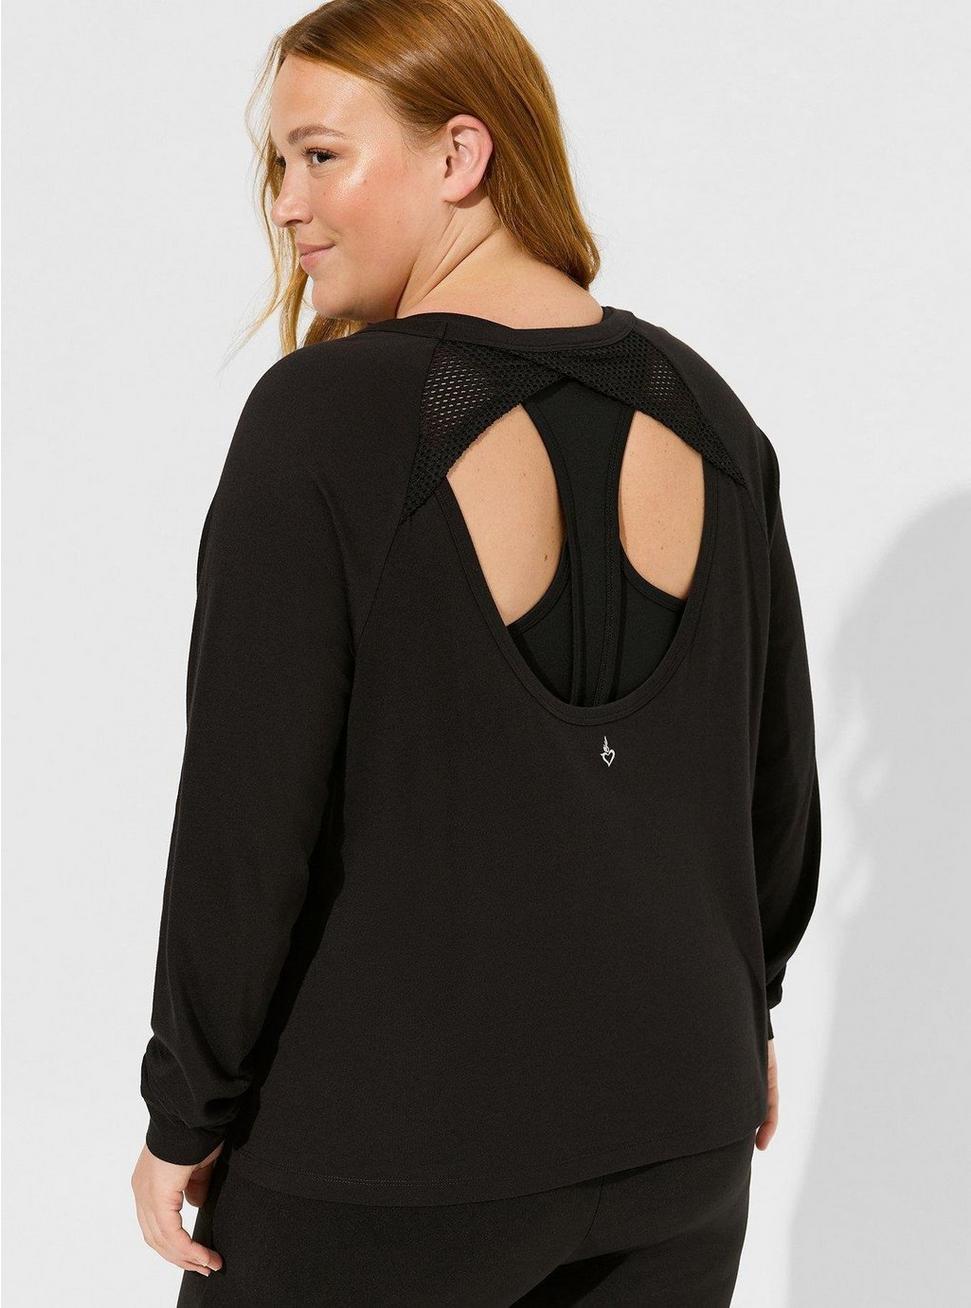 Performance Cotton Open Back Long Sleeve Active Tee with Mesh Detail, DEEP BLACK, hi-res